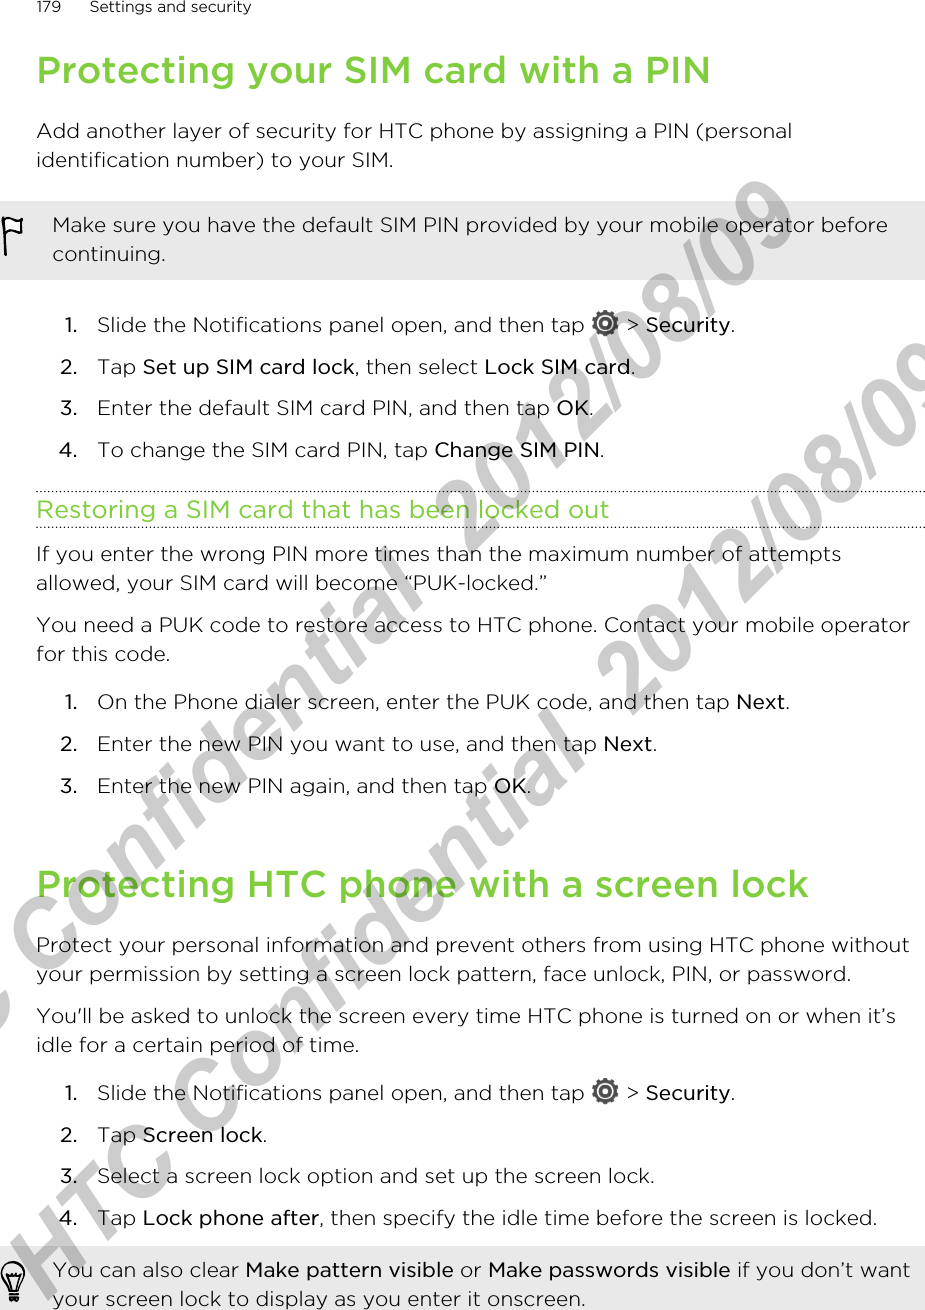 Protecting your SIM card with a PINAdd another layer of security for HTC phone by assigning a PIN (personalidentification number) to your SIM.Make sure you have the default SIM PIN provided by your mobile operator beforecontinuing.1. Slide the Notifications panel open, and then tap   &gt; Security.2. Tap Set up SIM card lock, then select Lock SIM card.3. Enter the default SIM card PIN, and then tap OK.4. To change the SIM card PIN, tap Change SIM PIN.Restoring a SIM card that has been locked outIf you enter the wrong PIN more times than the maximum number of attemptsallowed, your SIM card will become “PUK-locked.”You need a PUK code to restore access to HTC phone. Contact your mobile operatorfor this code.1. On the Phone dialer screen, enter the PUK code, and then tap Next.2. Enter the new PIN you want to use, and then tap Next.3. Enter the new PIN again, and then tap OK.Protecting HTC phone with a screen lockProtect your personal information and prevent others from using HTC phone withoutyour permission by setting a screen lock pattern, face unlock, PIN, or password.You&apos;ll be asked to unlock the screen every time HTC phone is turned on or when it’sidle for a certain period of time.1. Slide the Notifications panel open, and then tap   &gt; Security.2. Tap Screen lock.3. Select a screen lock option and set up the screen lock.4. Tap Lock phone after, then specify the idle time before the screen is locked. You can also clear Make pattern visible or Make passwords visible if you don’t wantyour screen lock to display as you enter it onscreen.179 Settings and securityHTC Confidential  2012/08/09  HTC Confidential  2012/08/09 